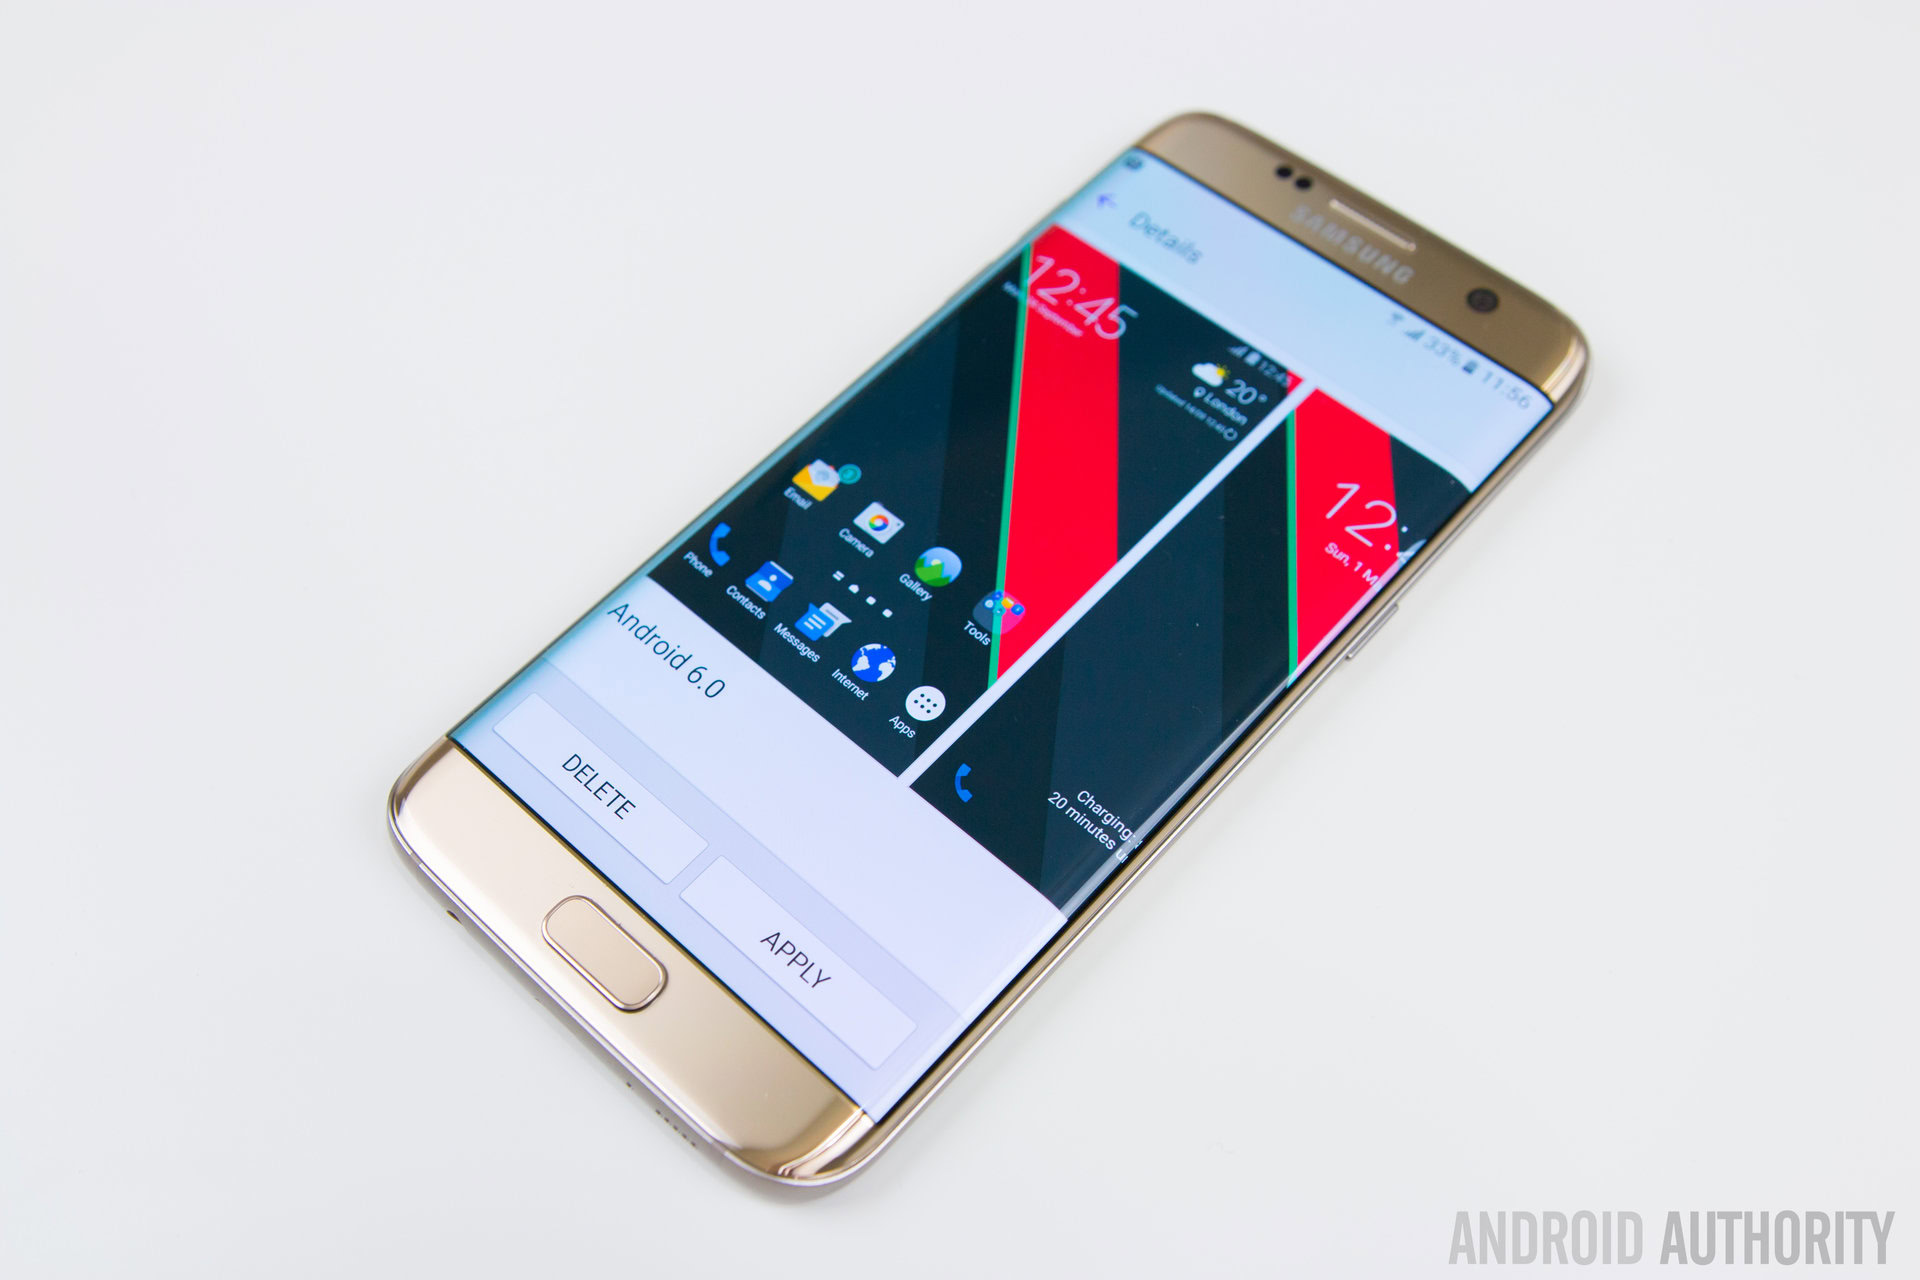 Samsung Galaxy S7 edge Android Authority